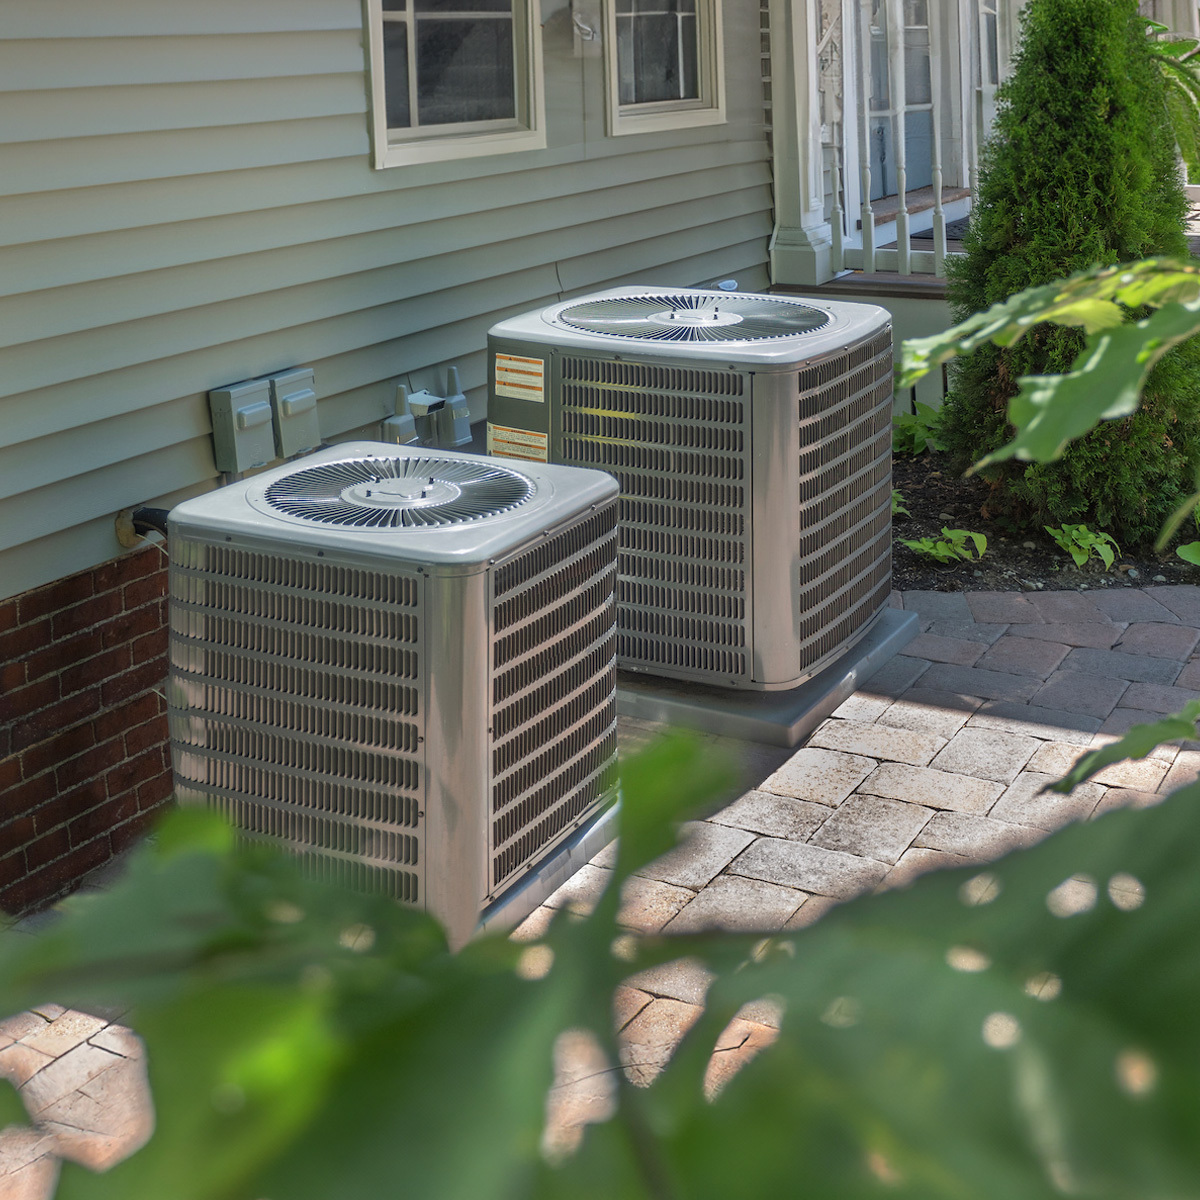 Two outdoor AC units next to one another on a brick floor. Average cost to replace ac unit in Florida.